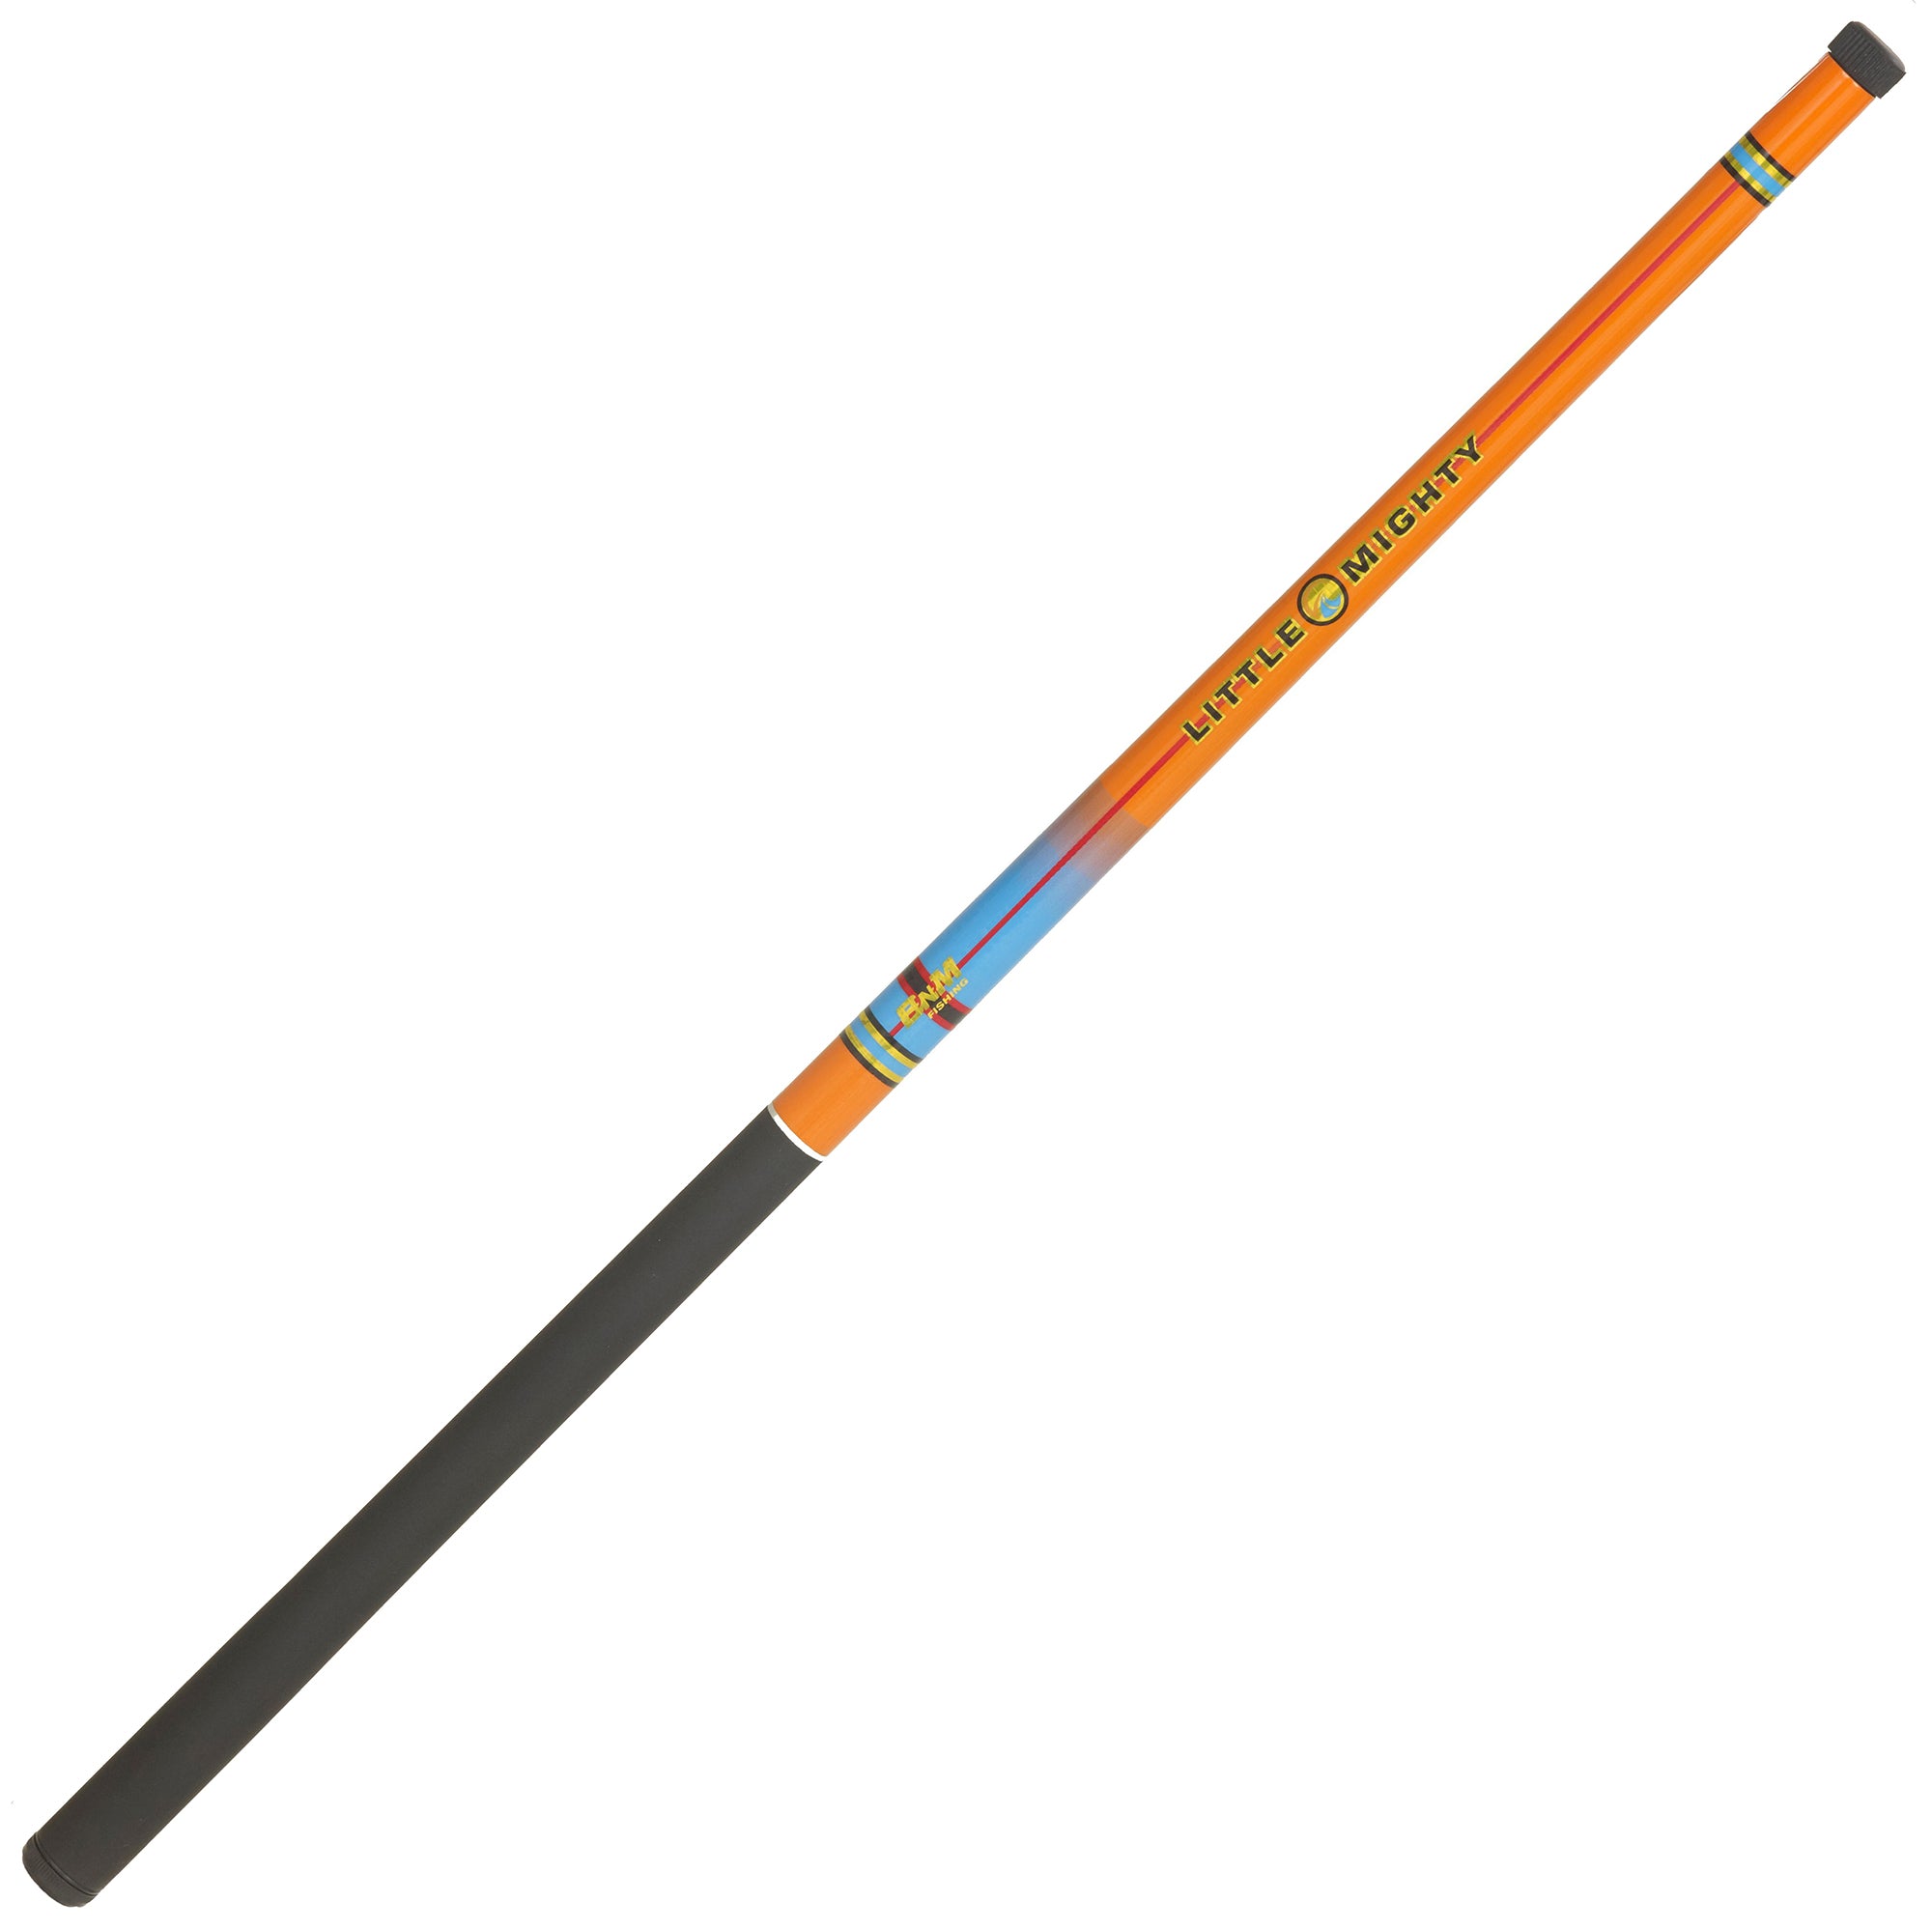 japan fishing rod, japan fishing rod Suppliers and Manufacturers